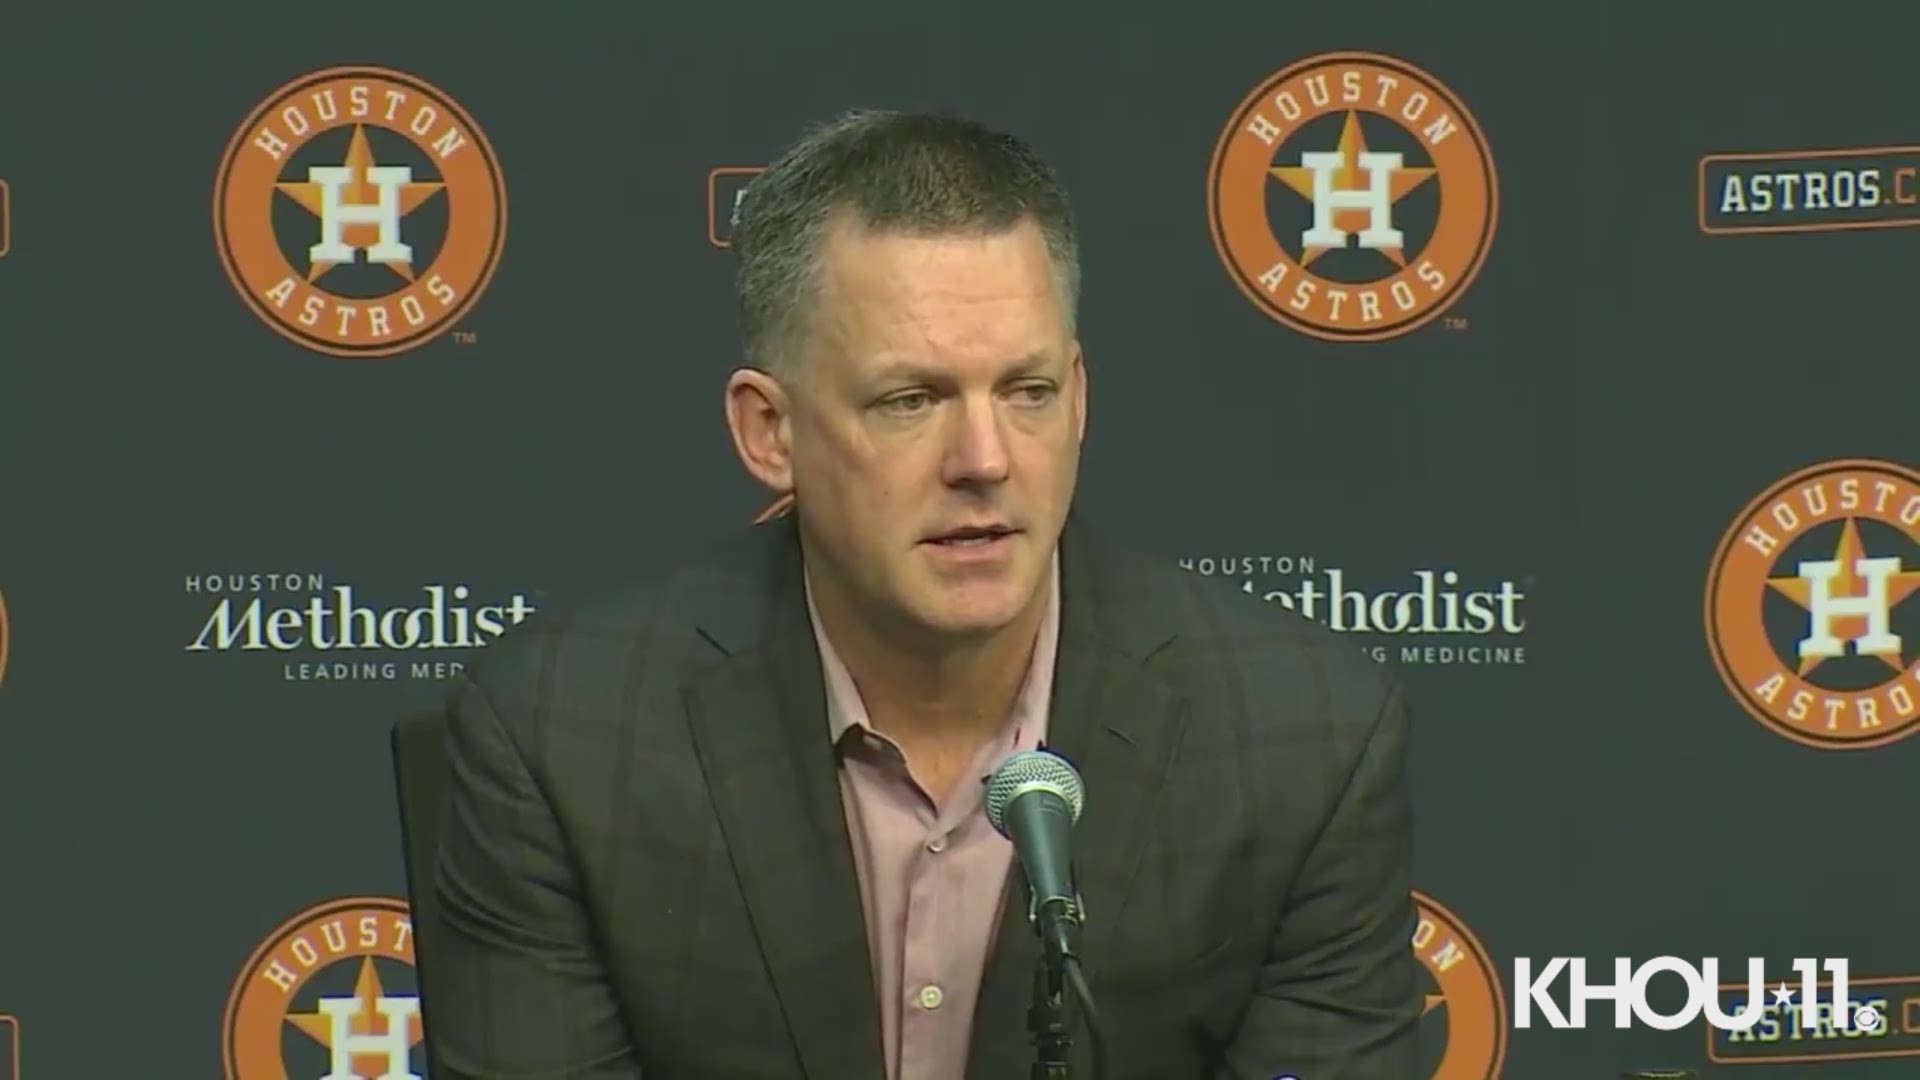 Astros Manager A.J. Hinch addressed his decision not to use ace pitcher Gerrit Cole in Game 7 of the World Series.